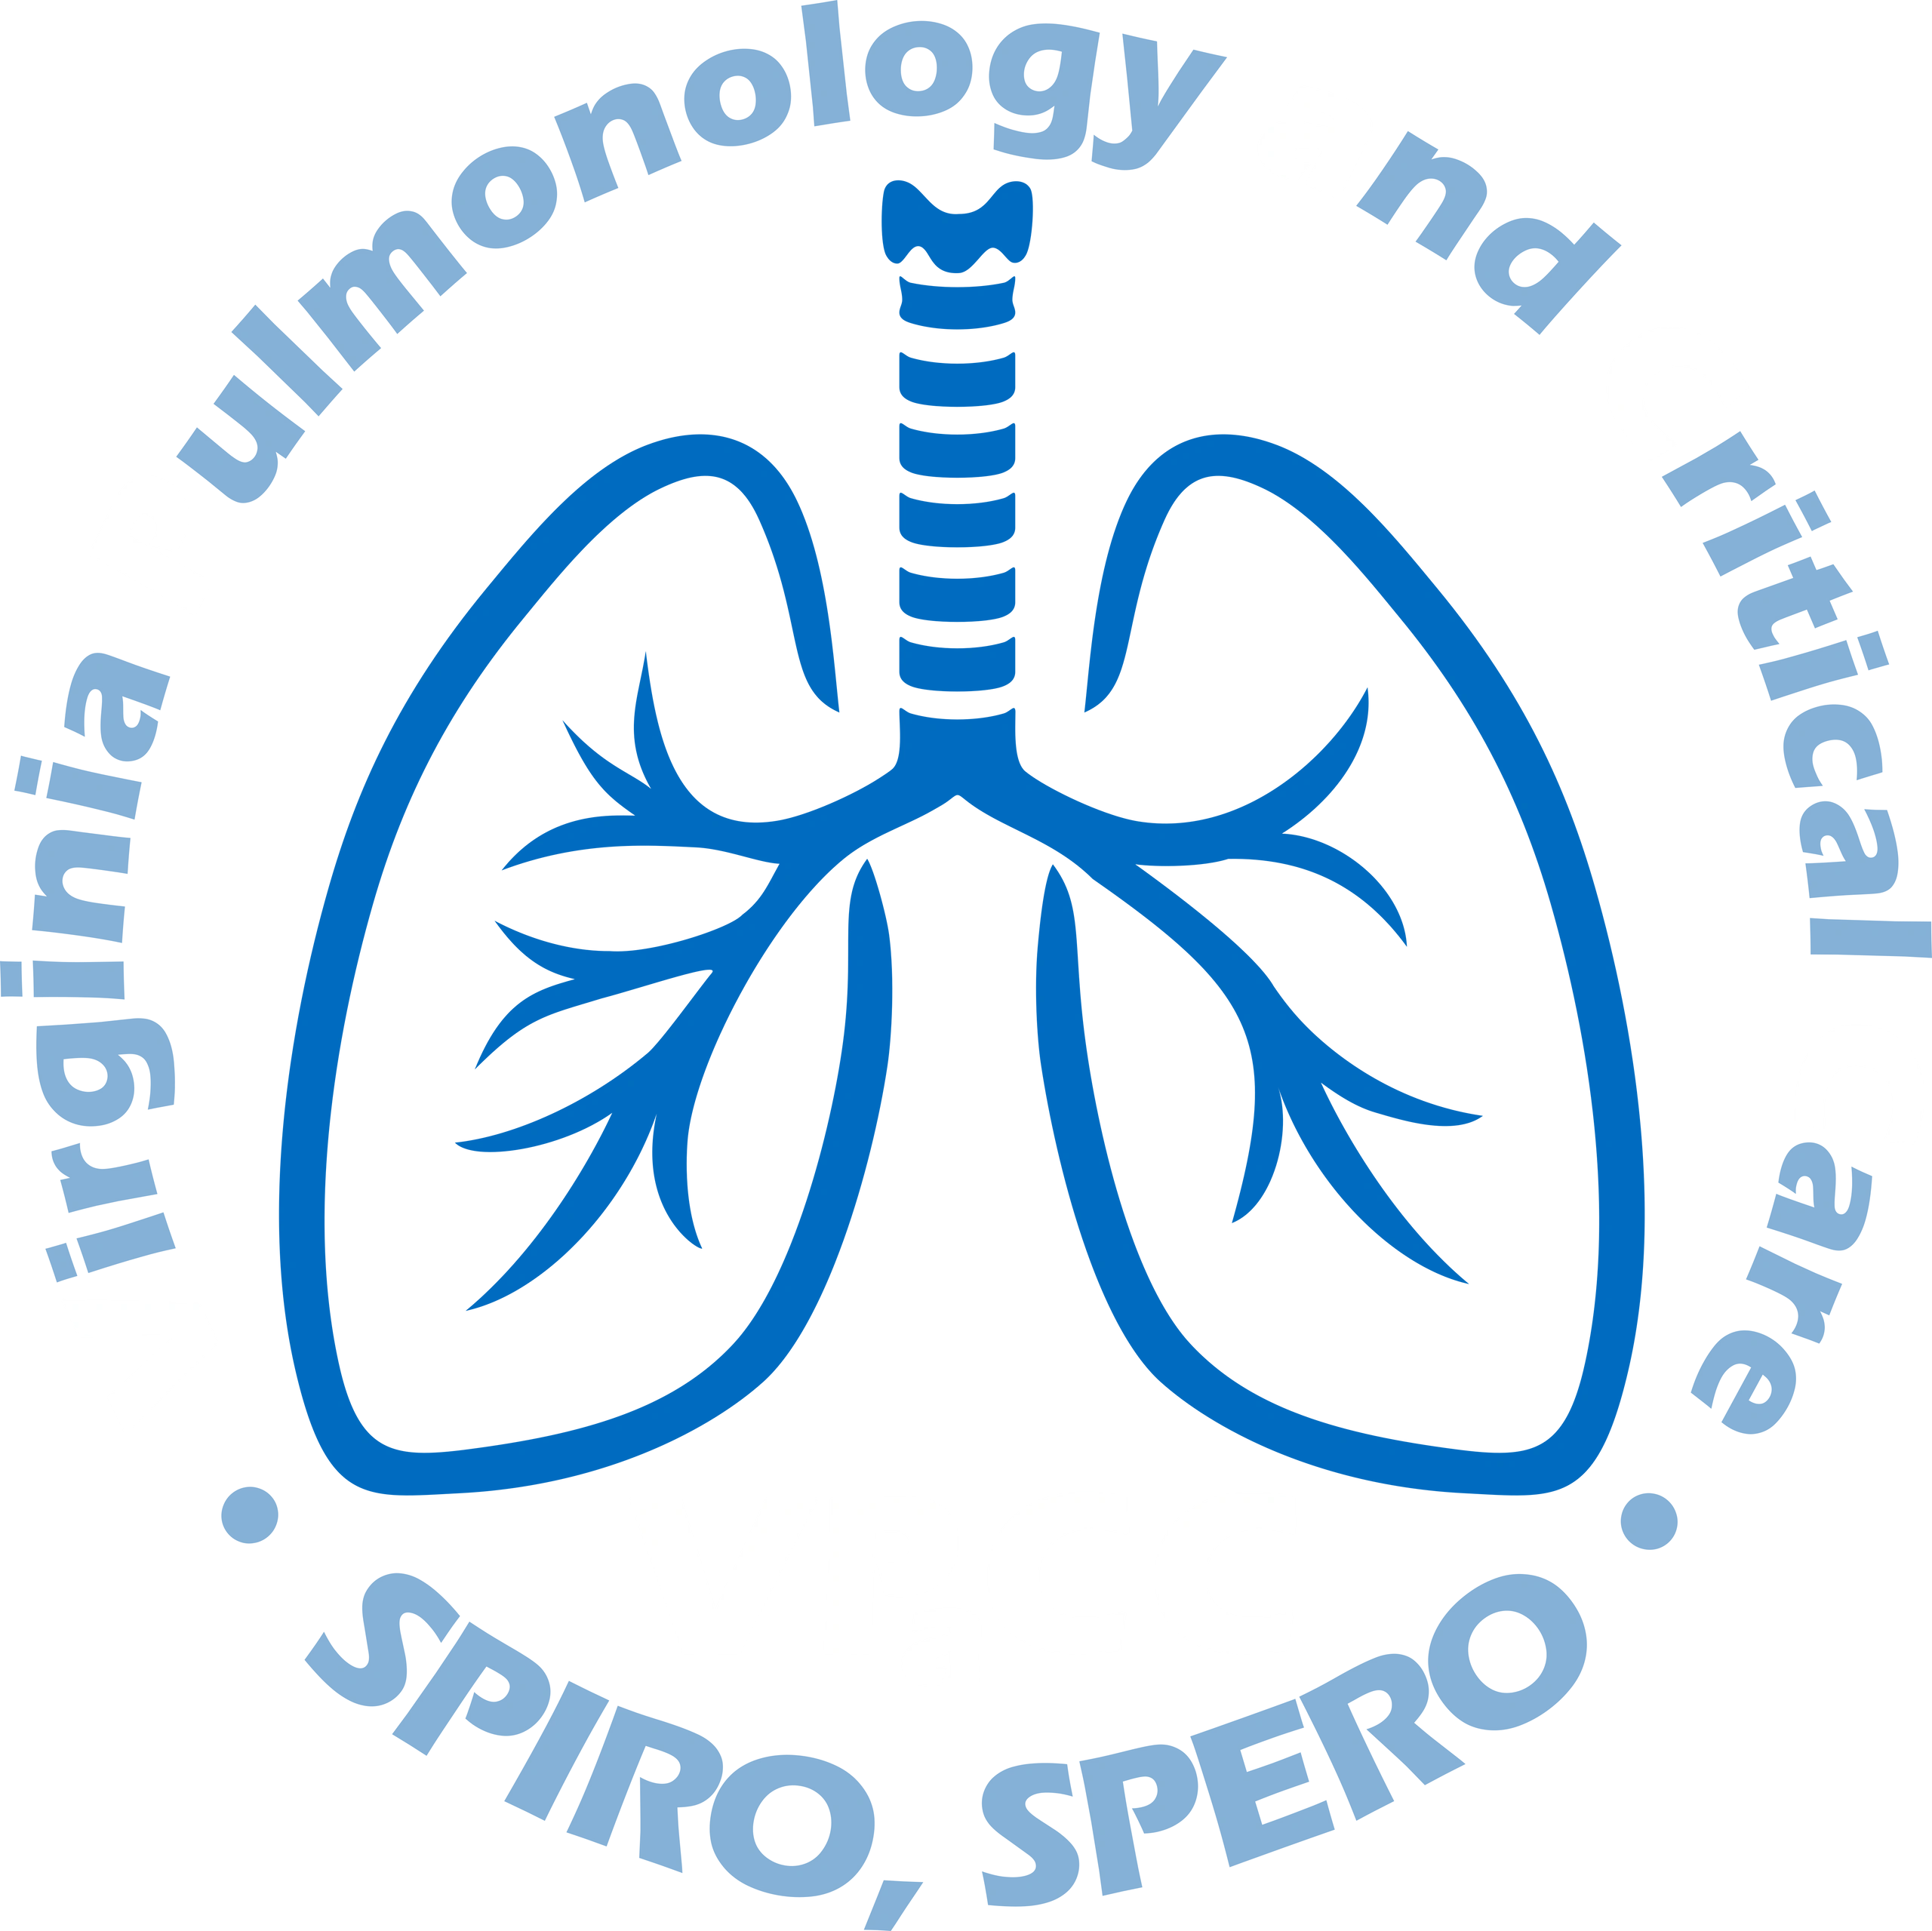 Virginia Pulmonology and Critical Care